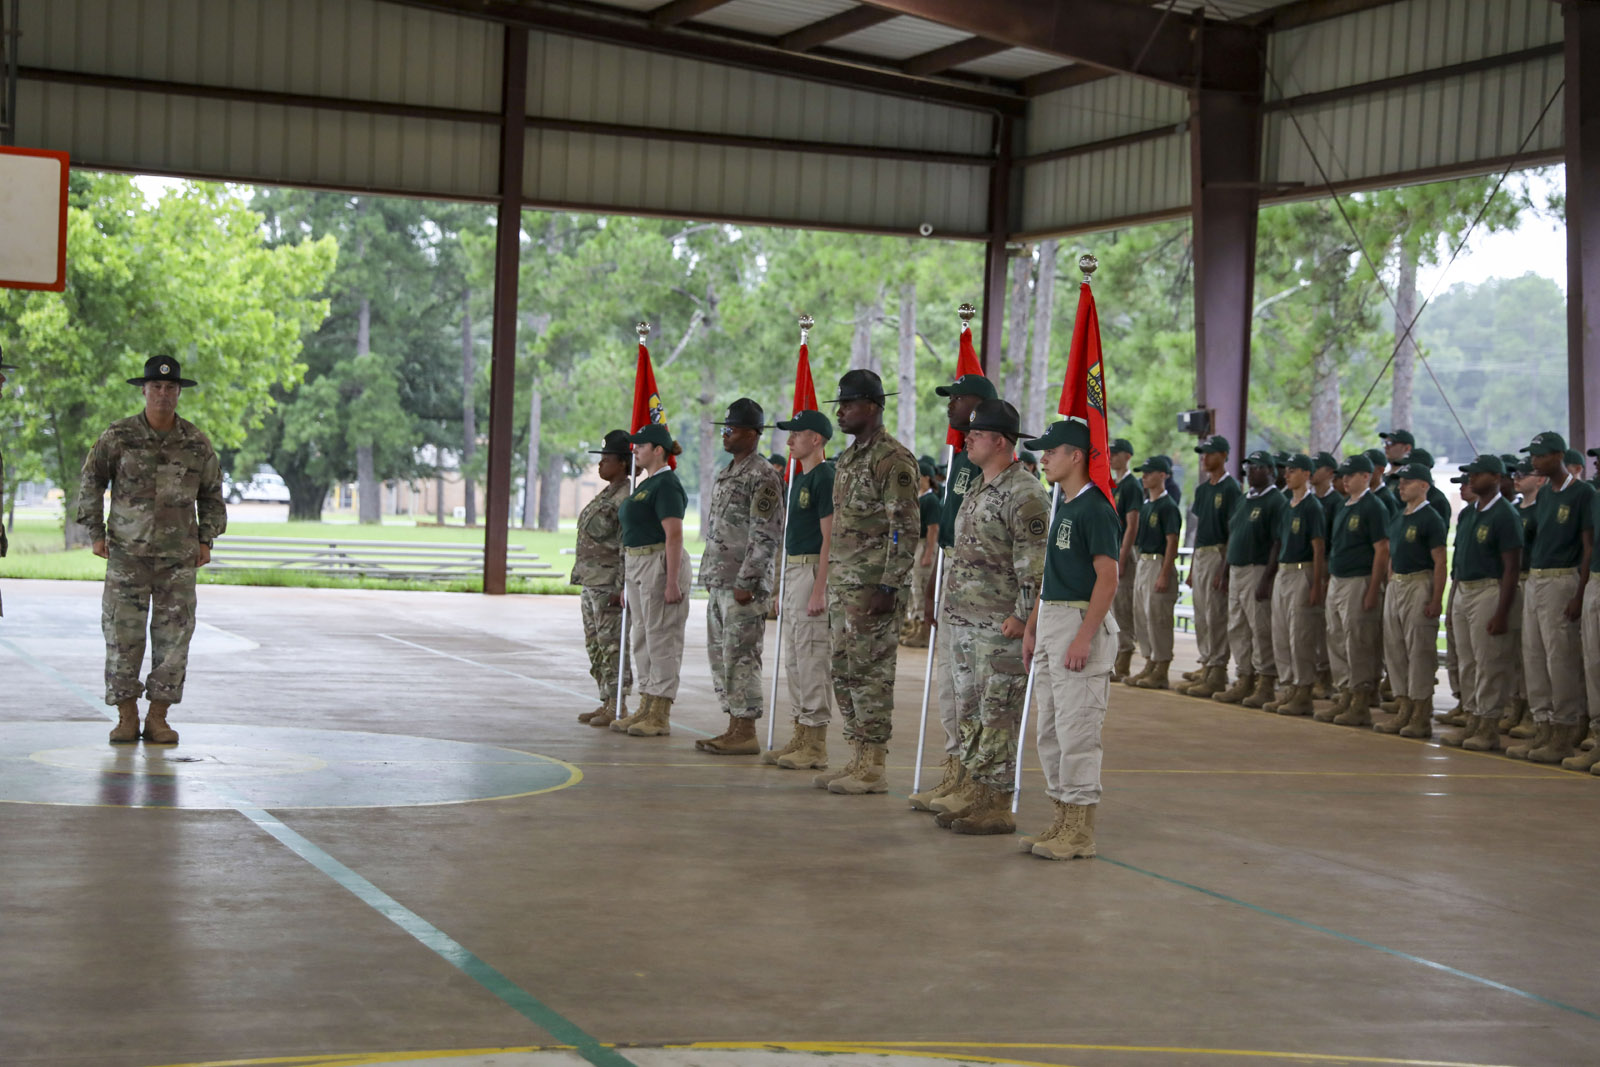 La. Guard’s Youth Challenge Program Acclimation Graduation marks launch of 30th anniversary cycle